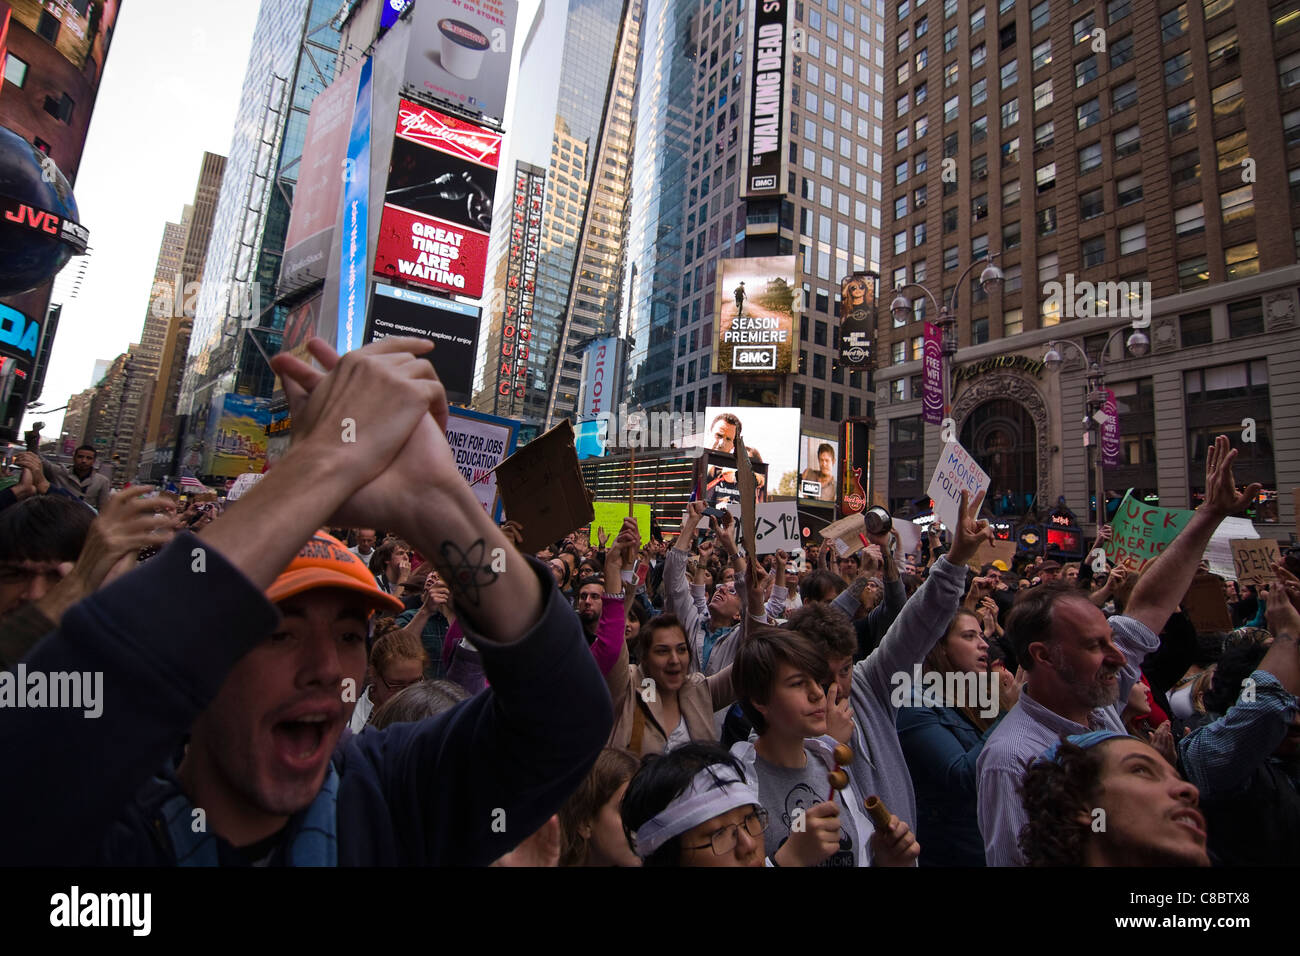 Thousands of Occupy Wall Street Protesters marching in Times Square New York City on October 15th 2011 Stock Photo